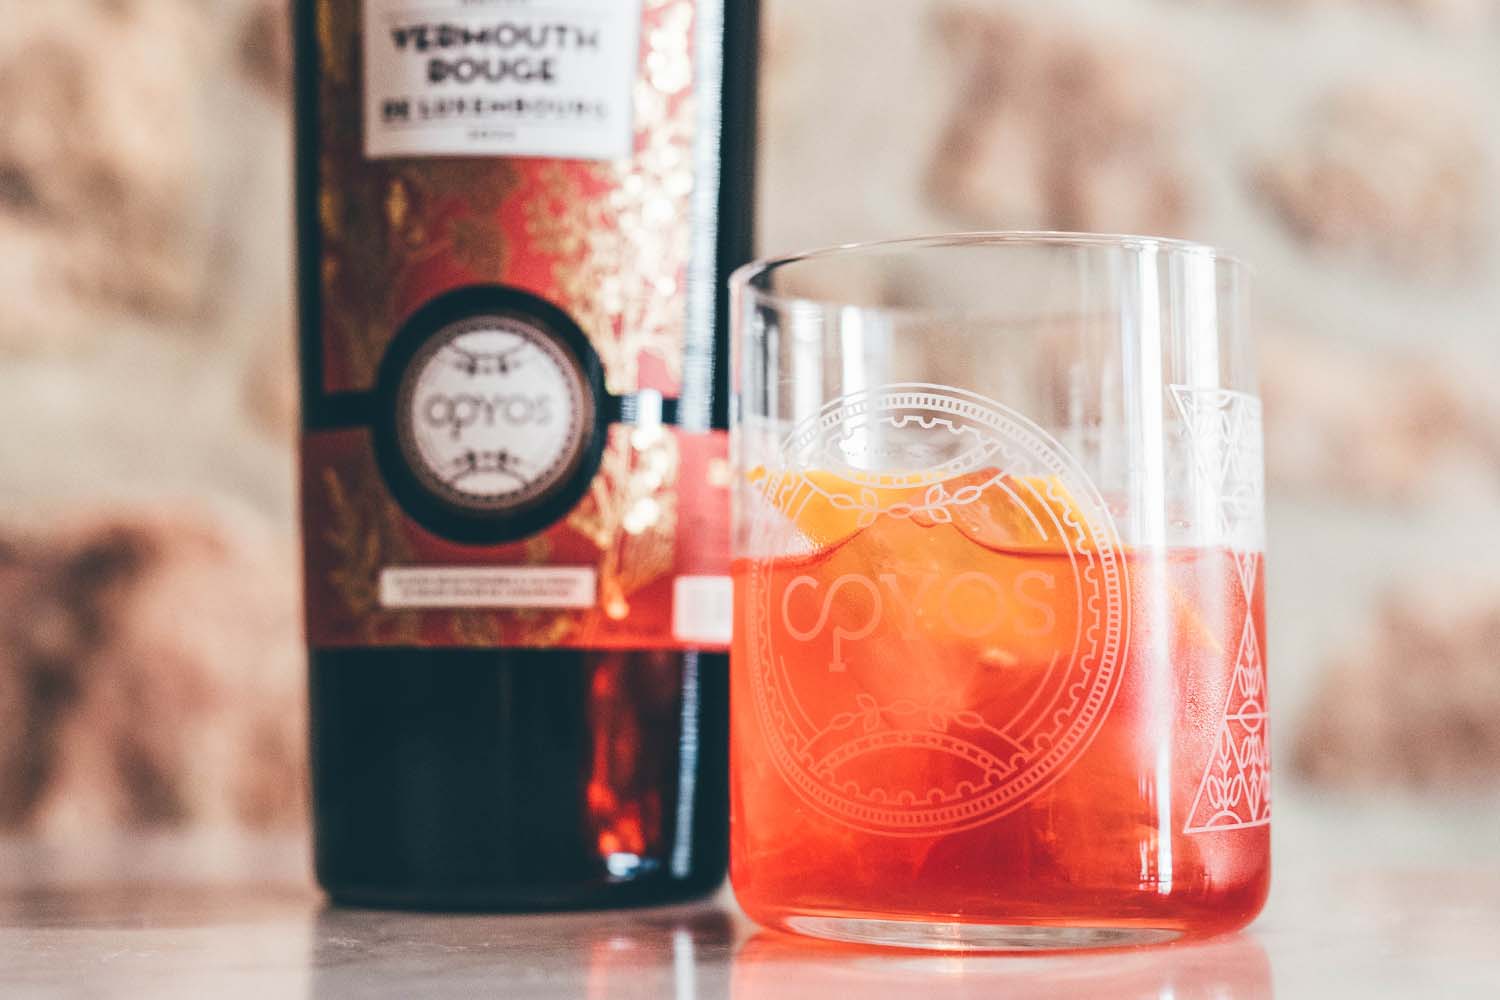 Vermouth Rouge de Luxembourg